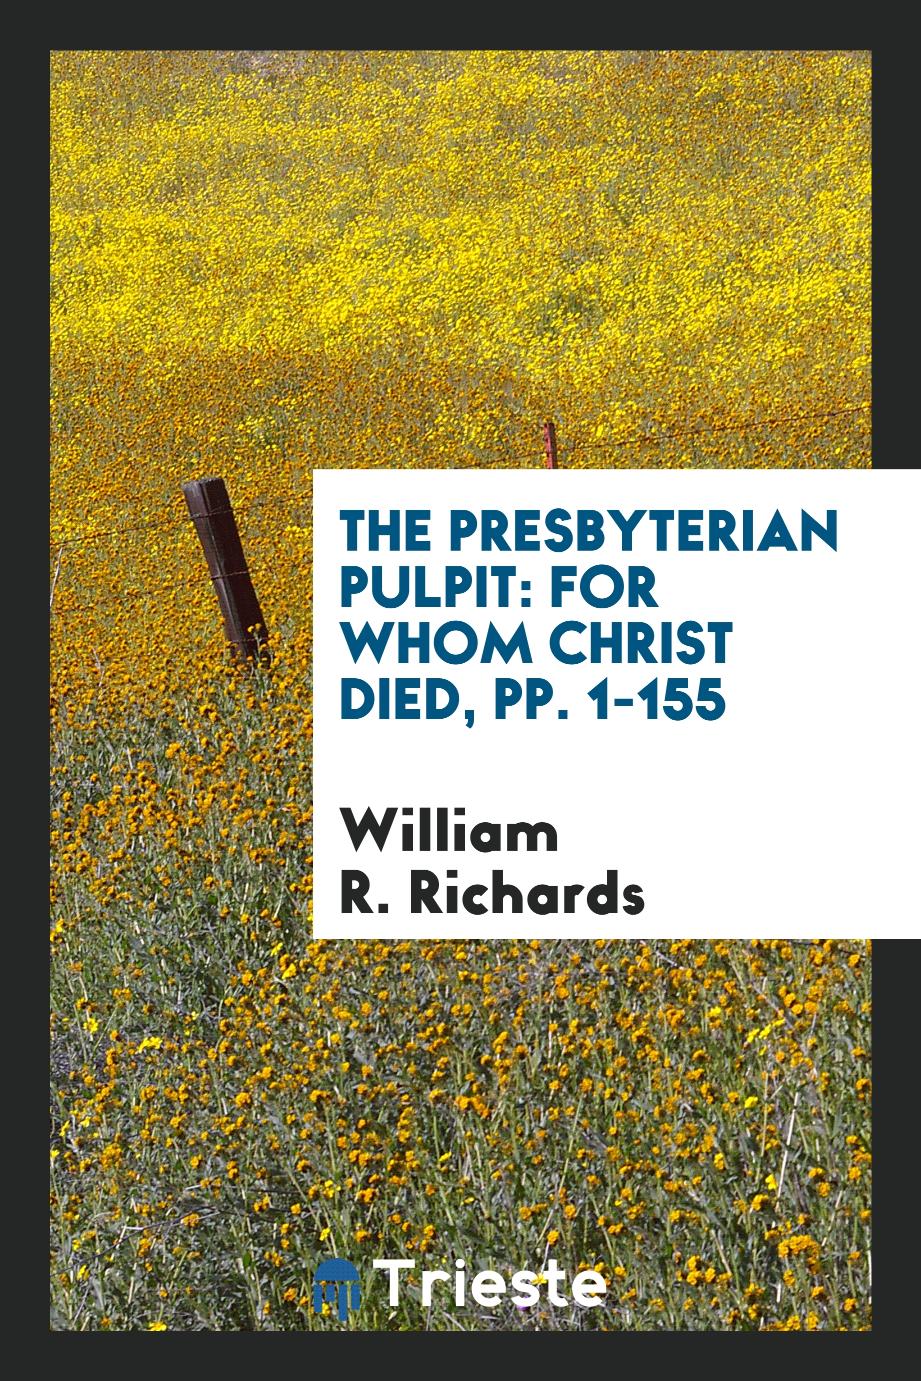 The Presbyterian Pulpit: For Whom Christ Died, pp. 1-155